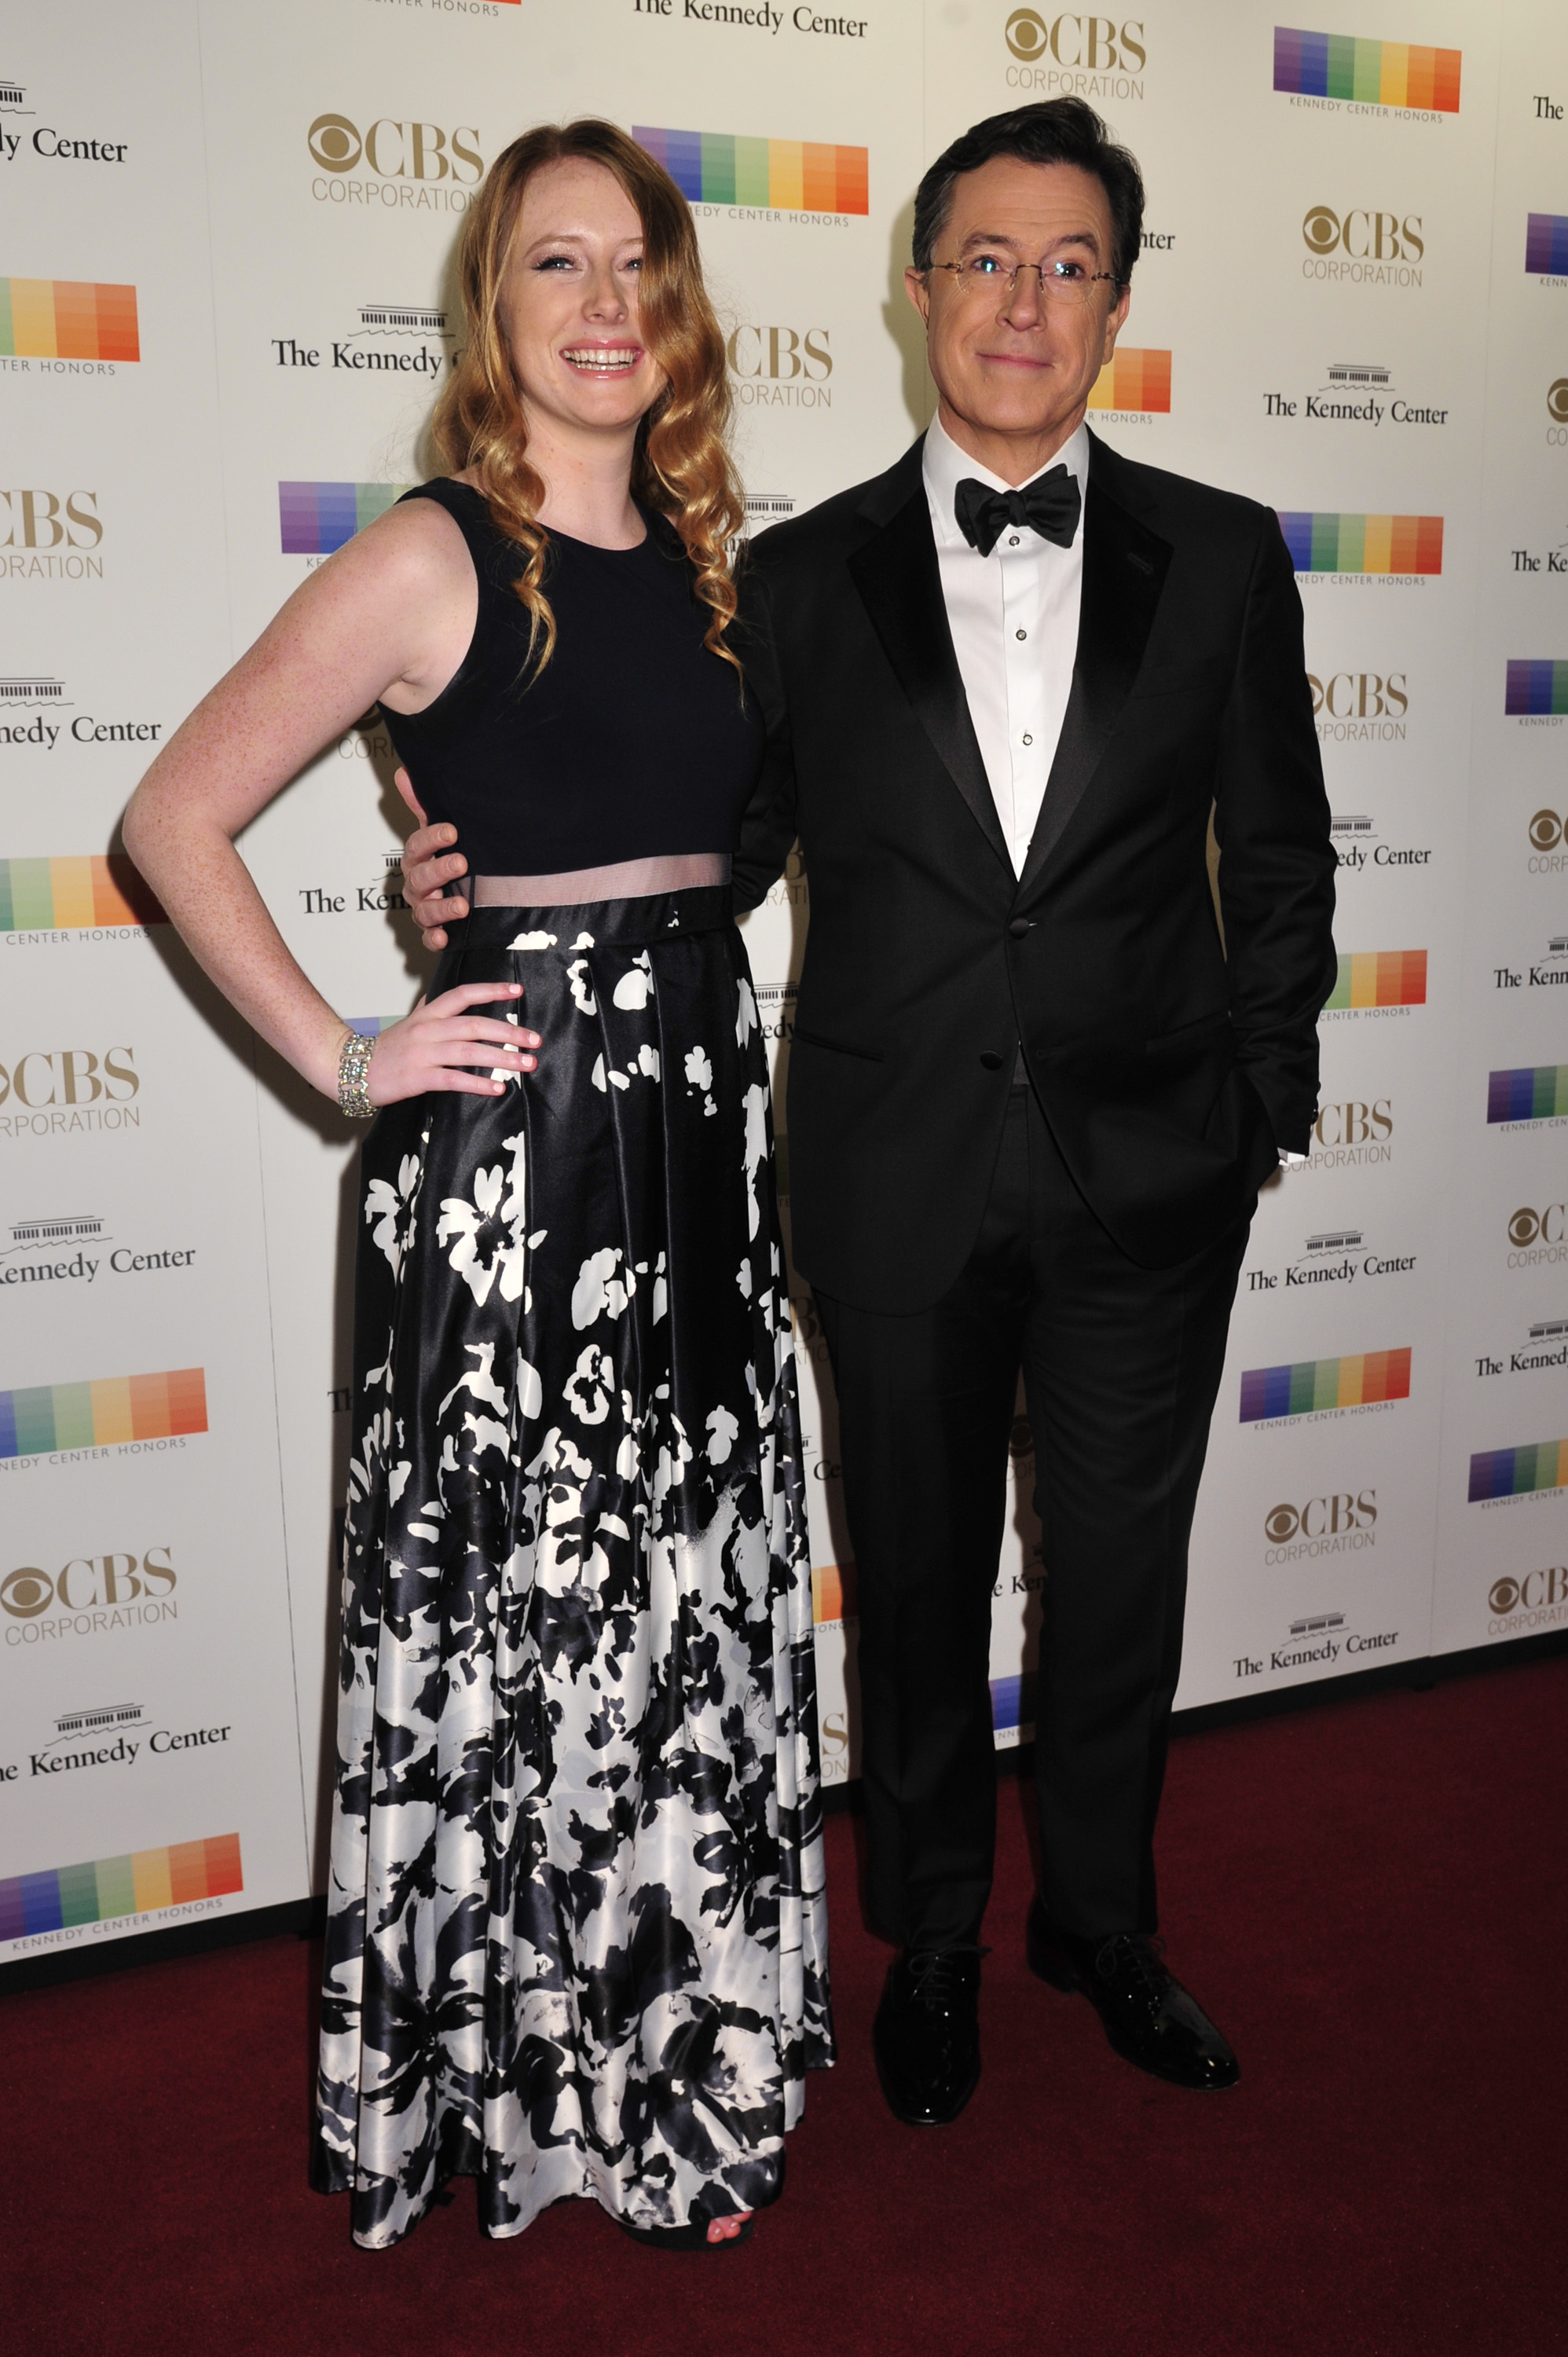 Madeleine Colbert and her dad, Stephen Colbert, arrive at the 38th Annual Kennedy Center Honors Gala at the Kennedy Center for the Performing Arts on December 6, 2015, in Washington, DC. | Source: Getty Images